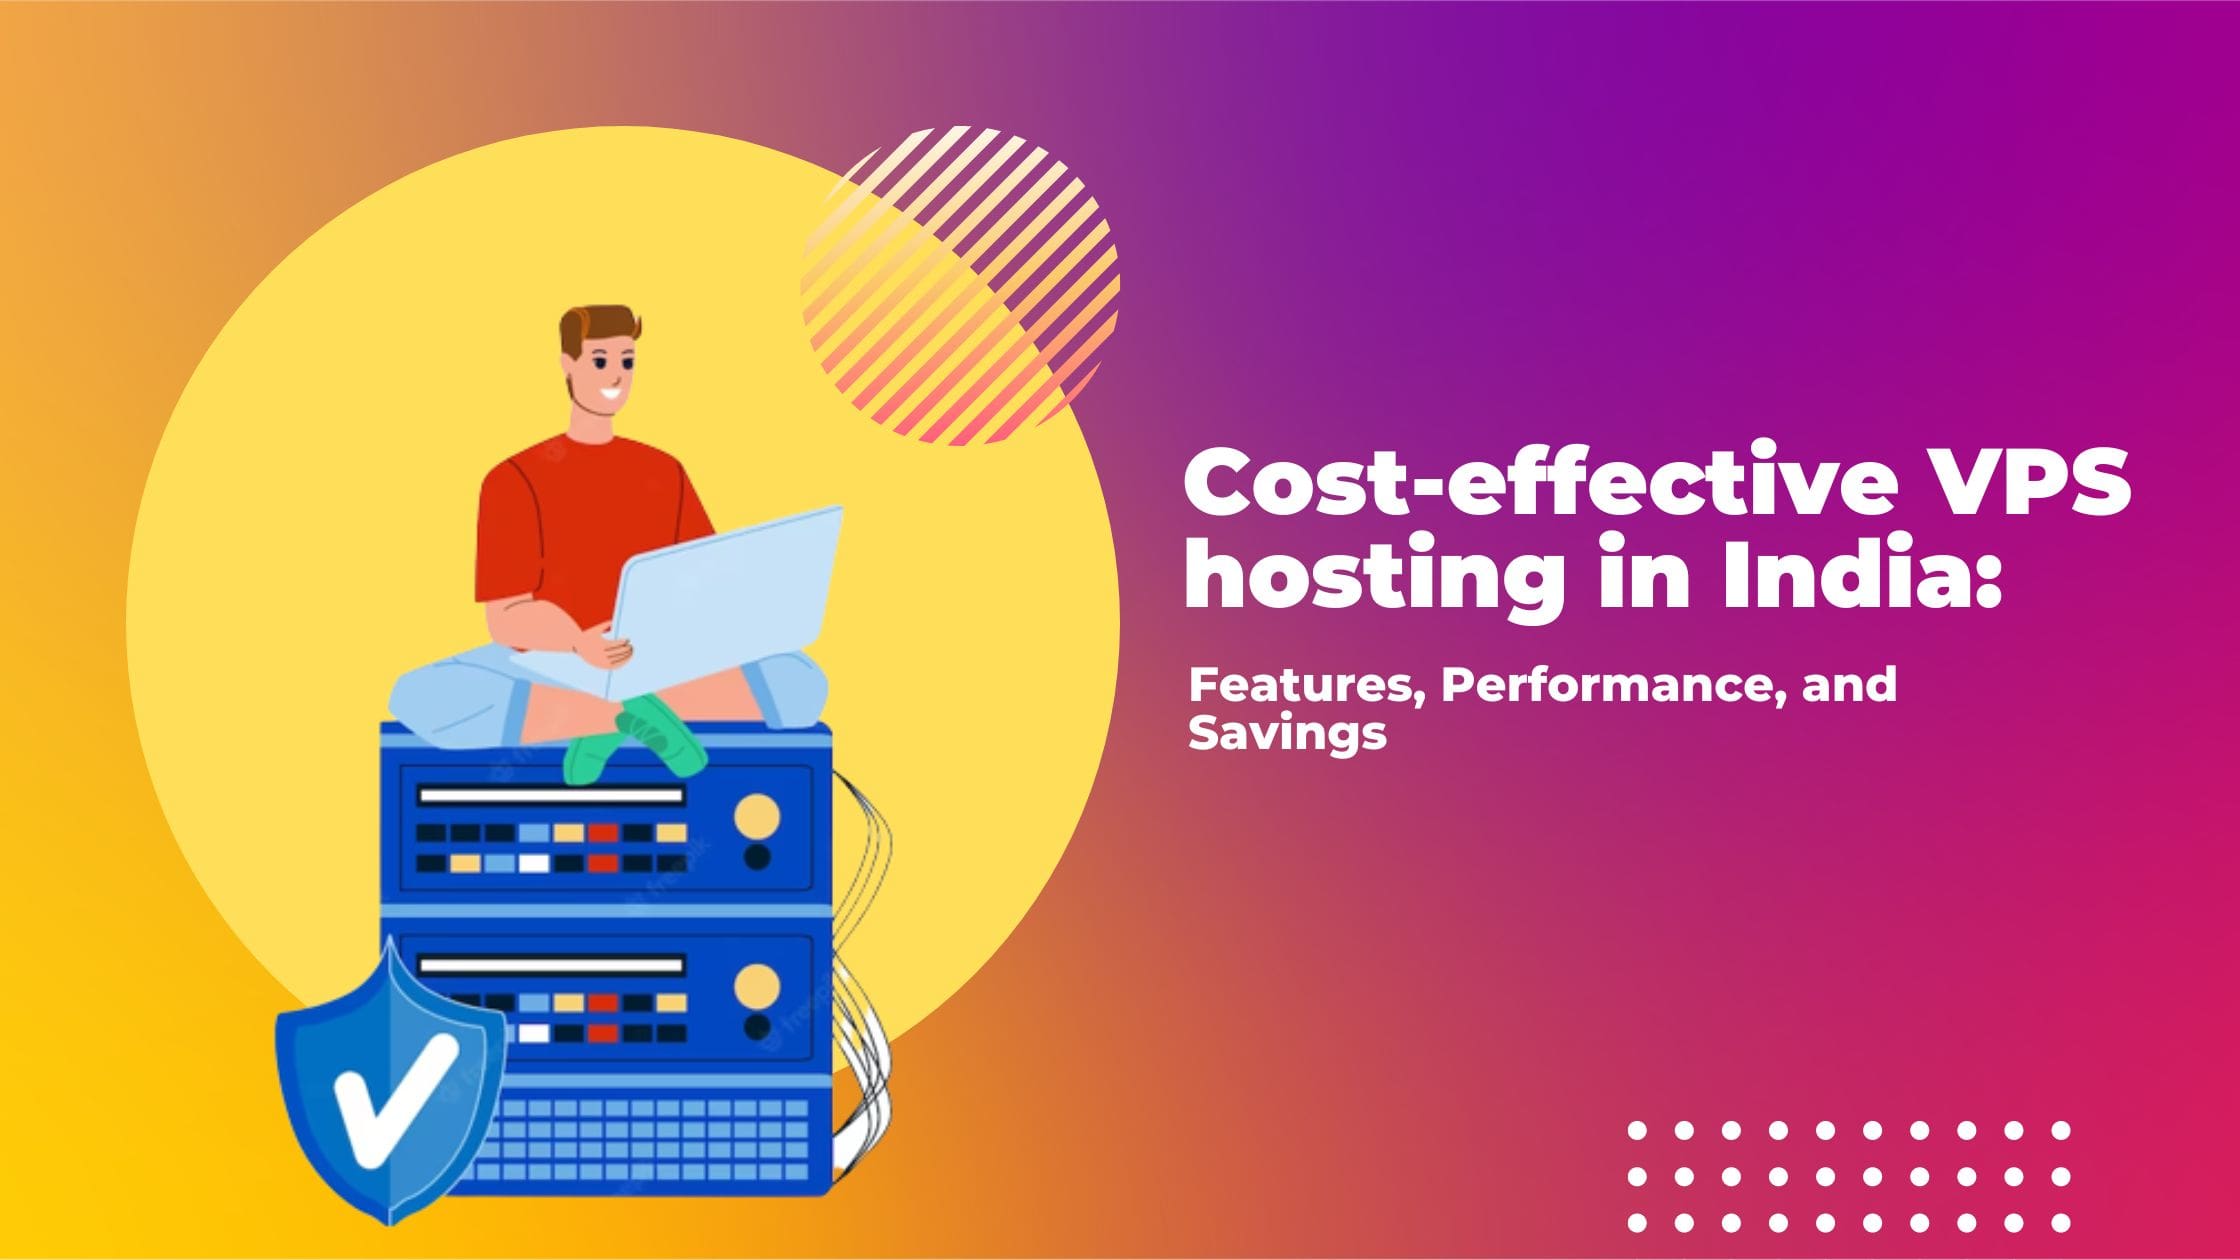 Cost-effective VPS hosting in India Features, Performance, and Savings